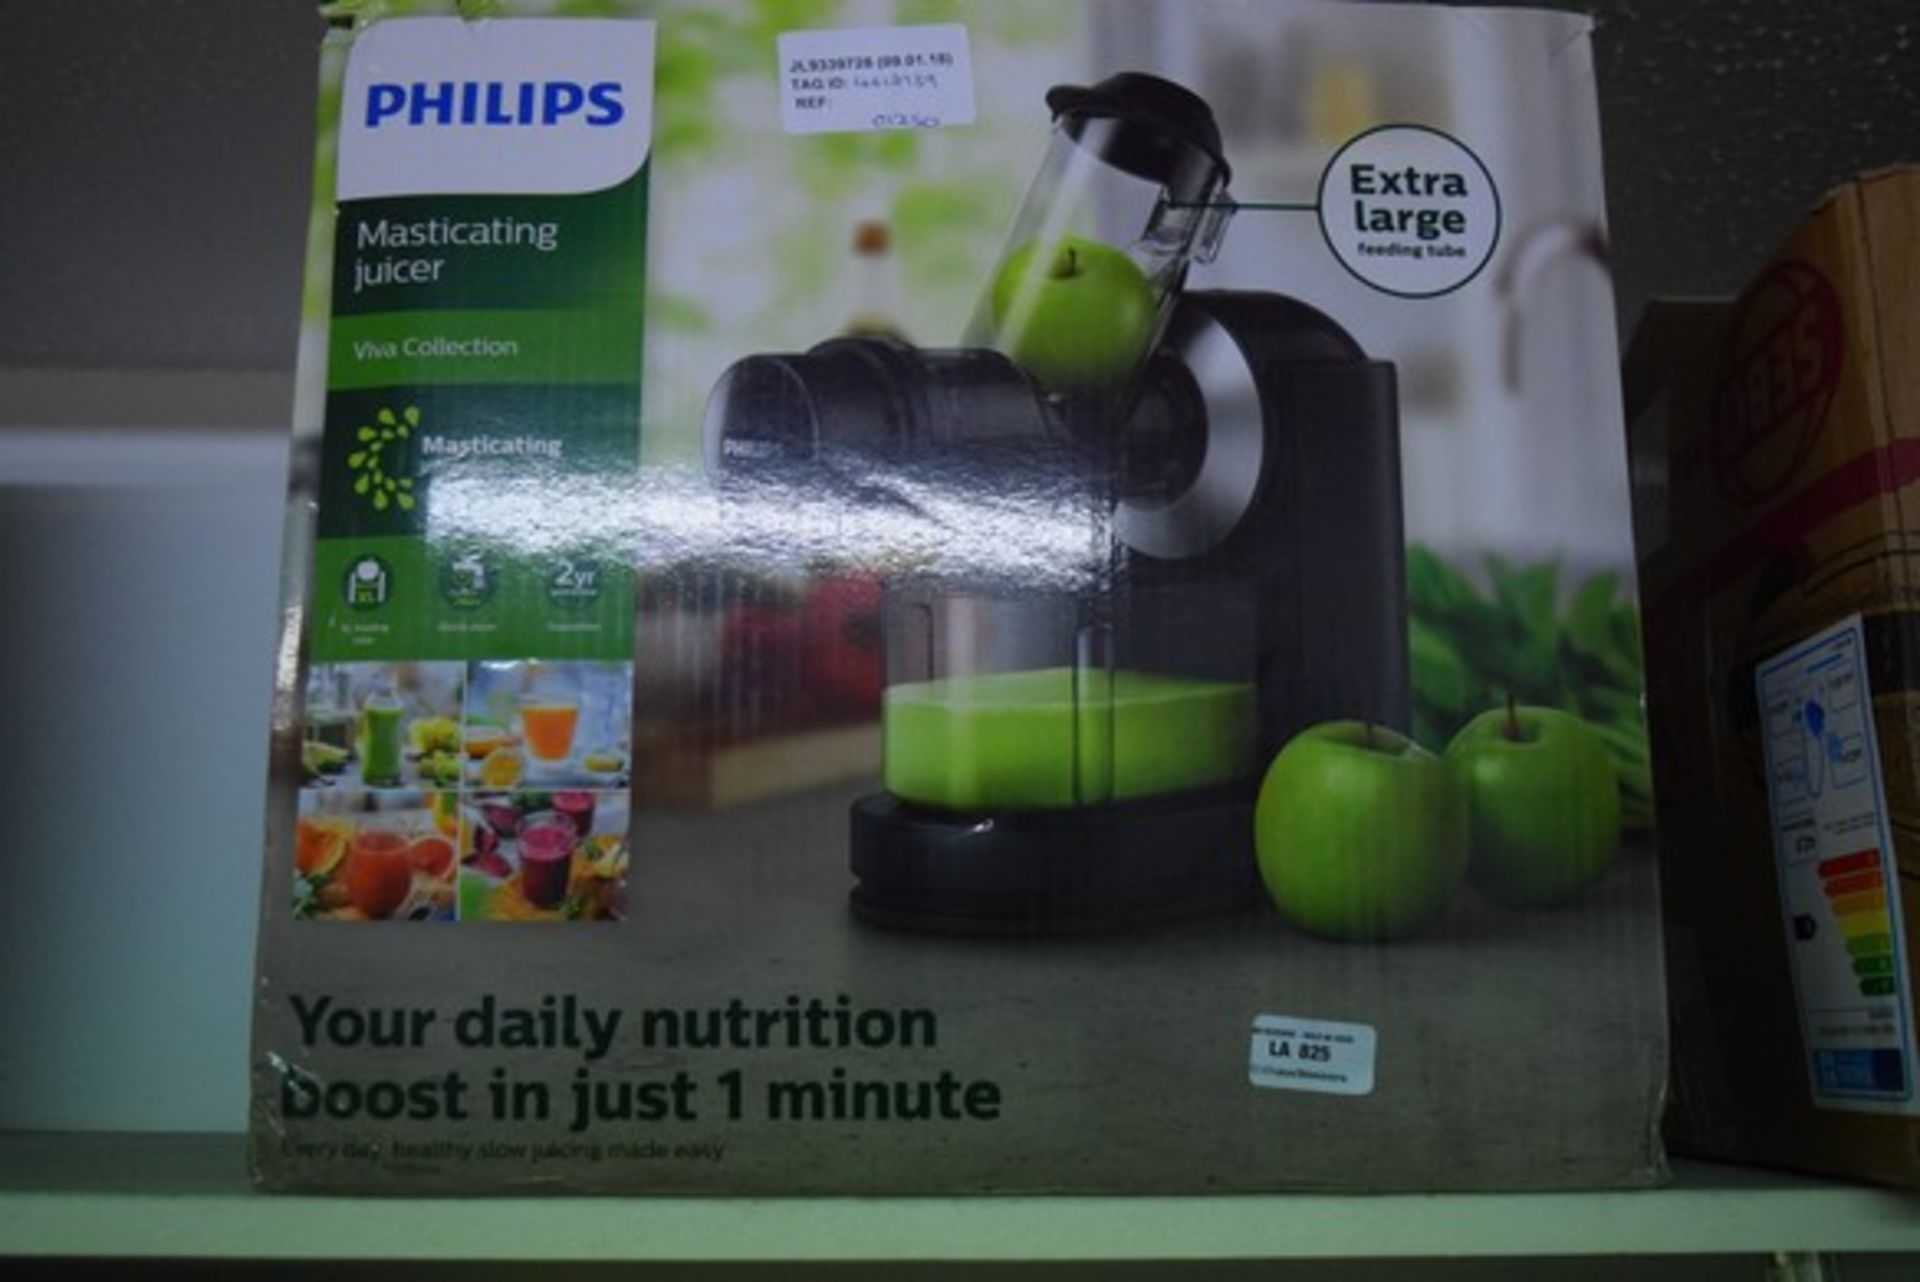 1 x BOXED PHILIPS MASTICATING JUICER VIVA COLLECTION RRP £125 09.01.18 4612939 *PLEASE NOTE THAT THE